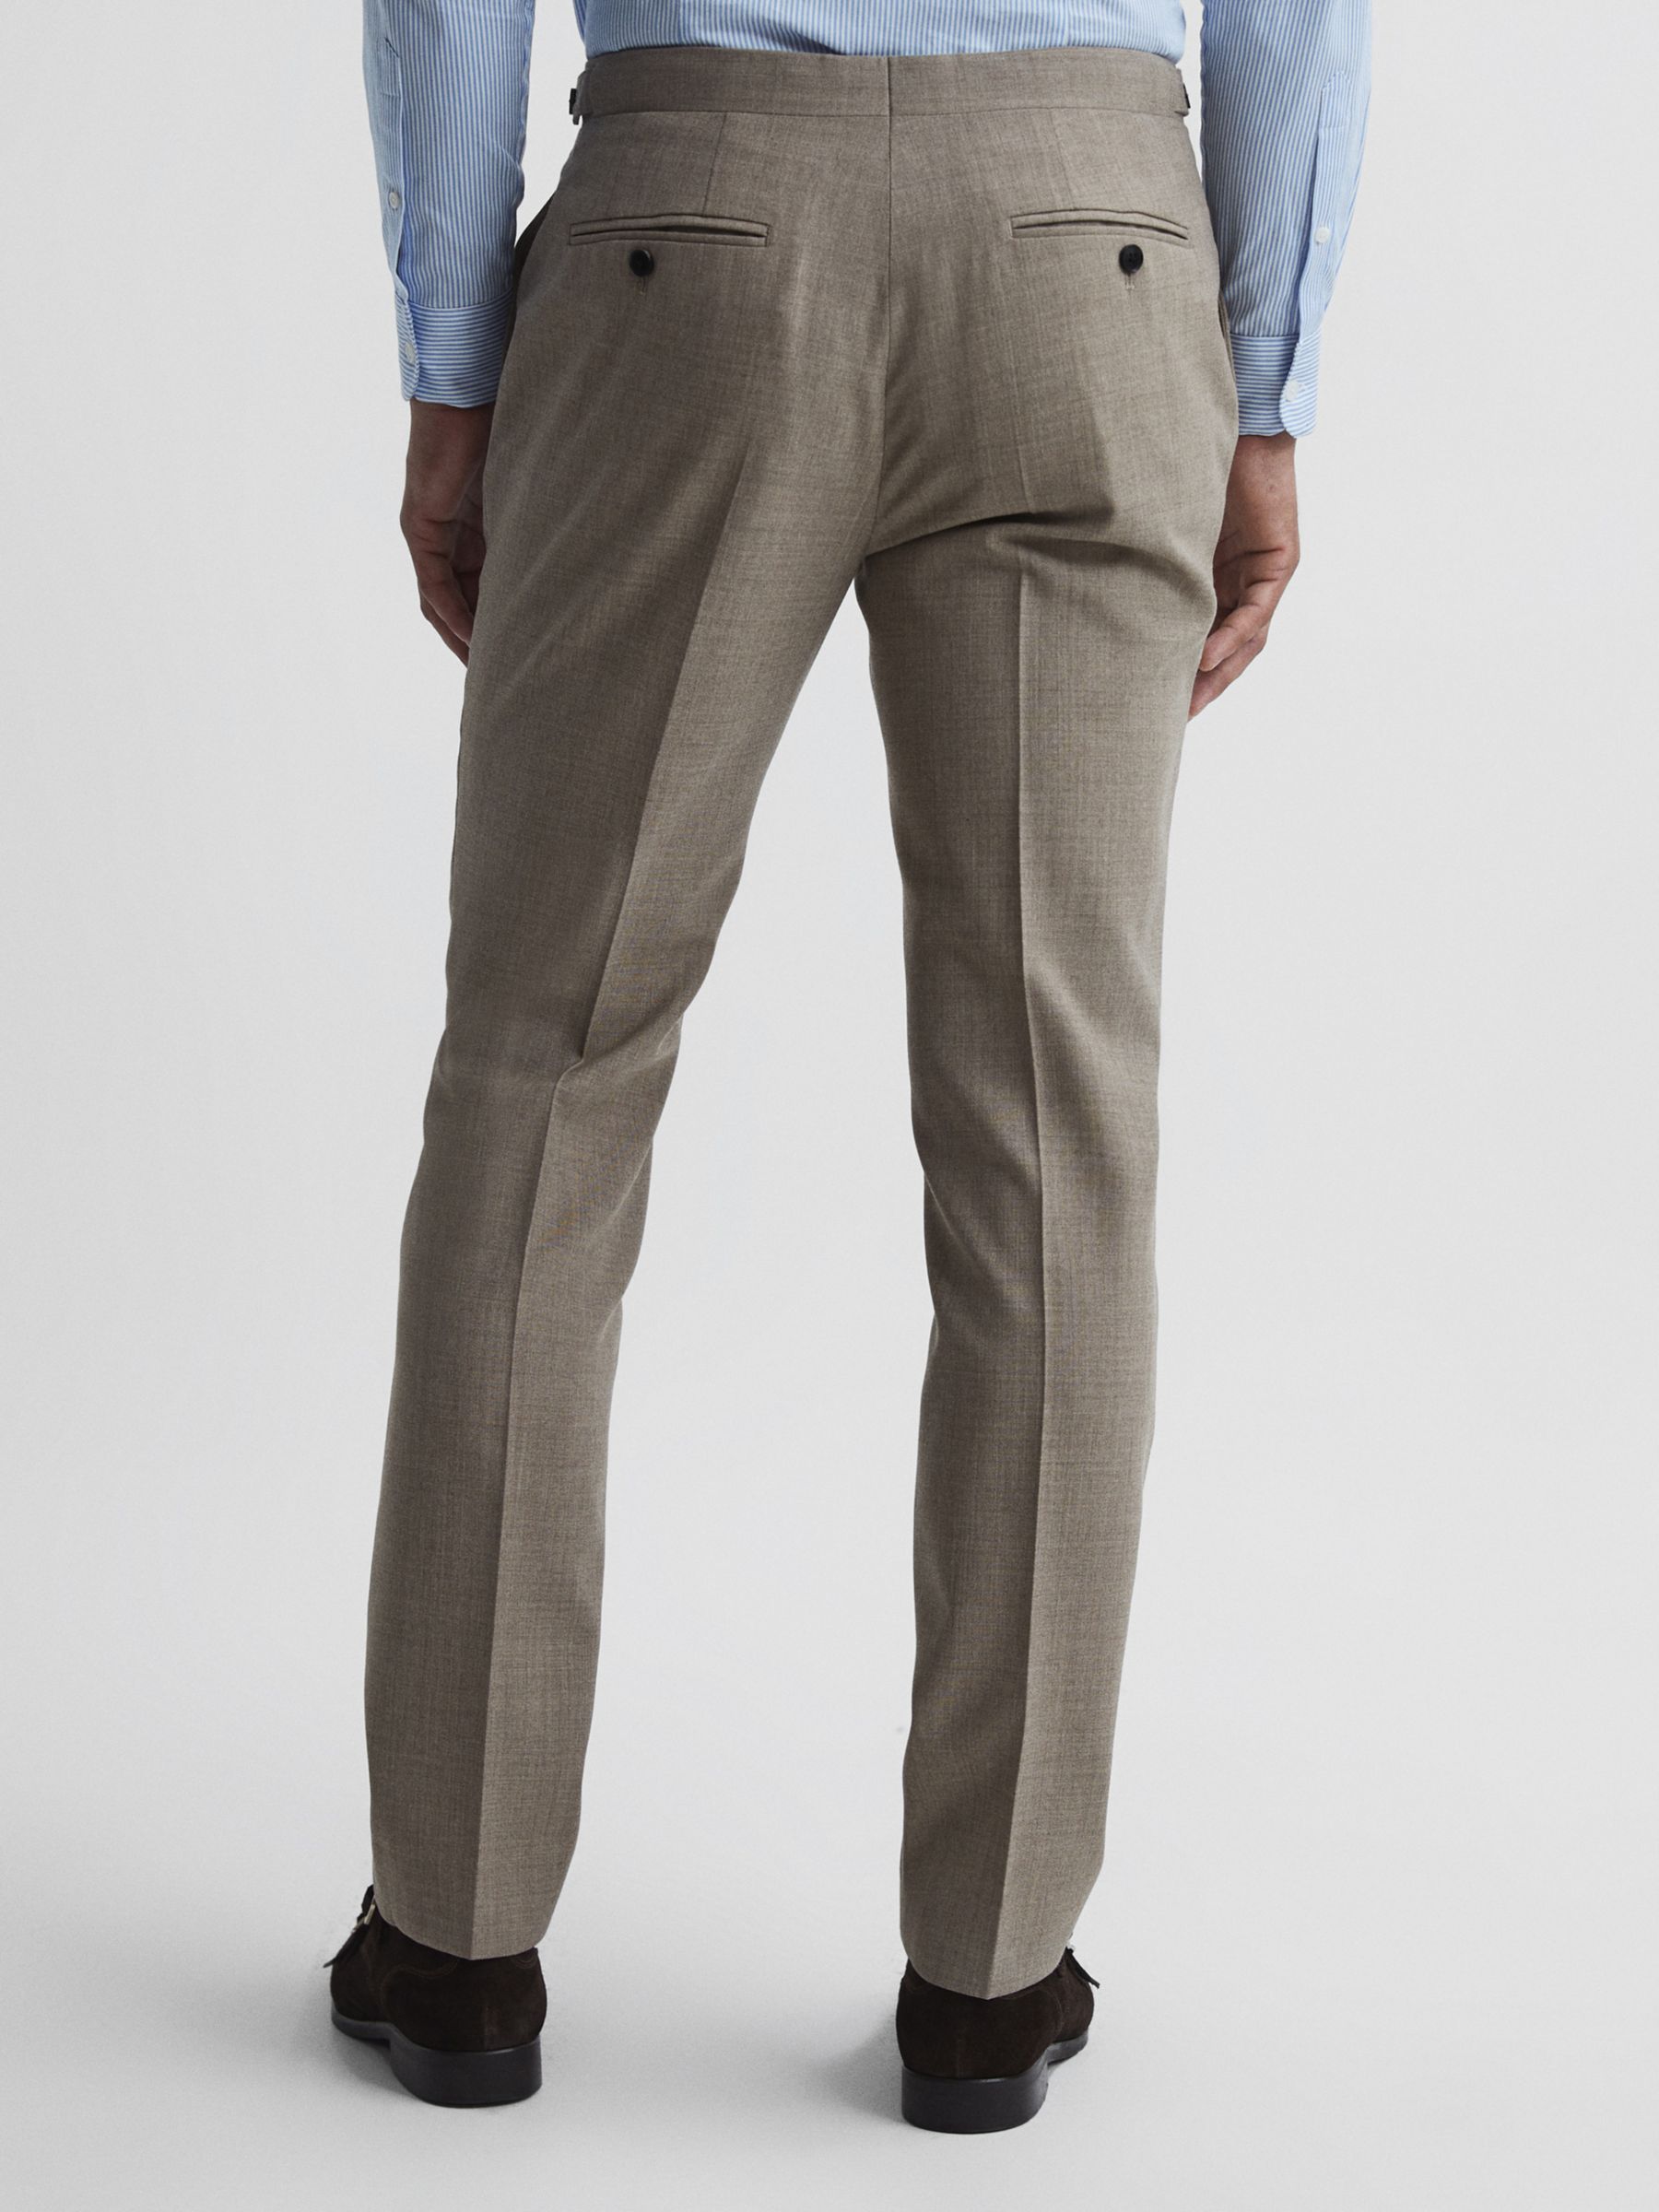 Reiss Rope Wool Suit Trousers, Light Brown at John Lewis & Partners